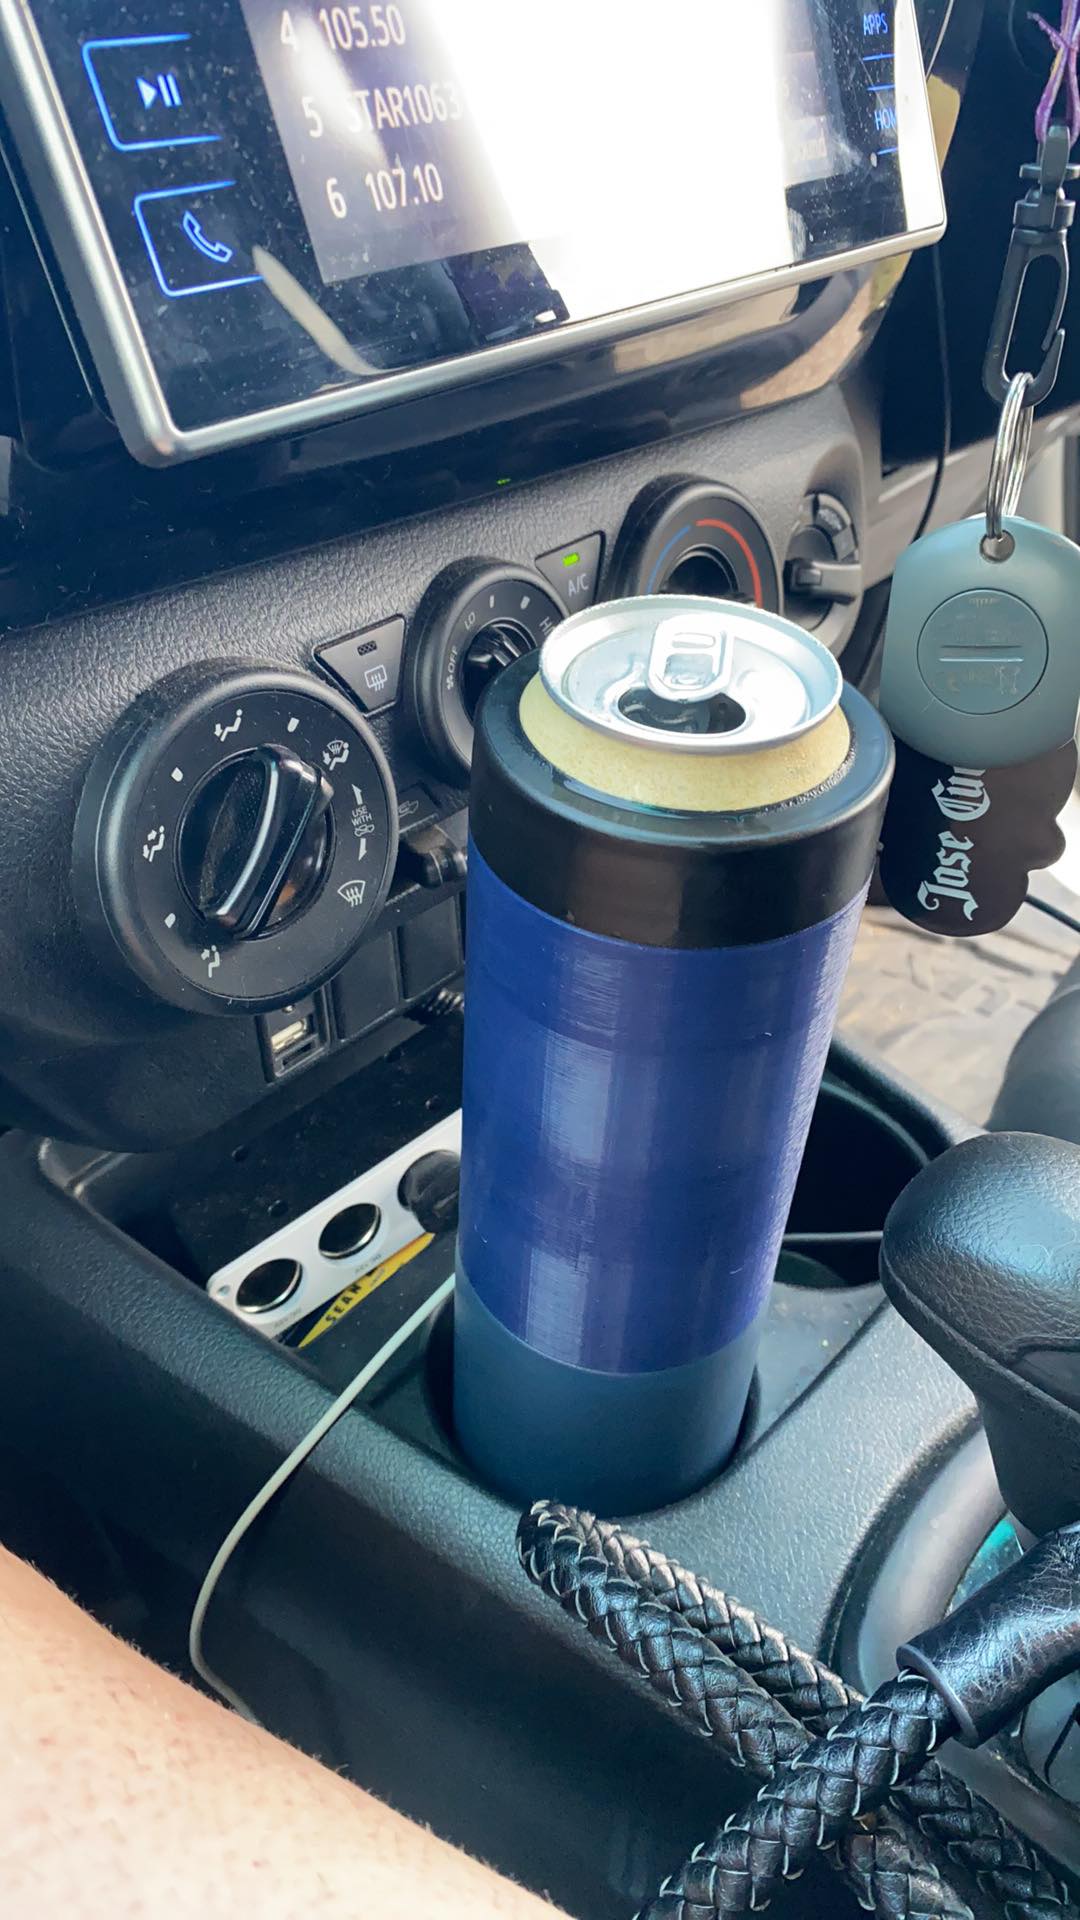 yeti double can holder